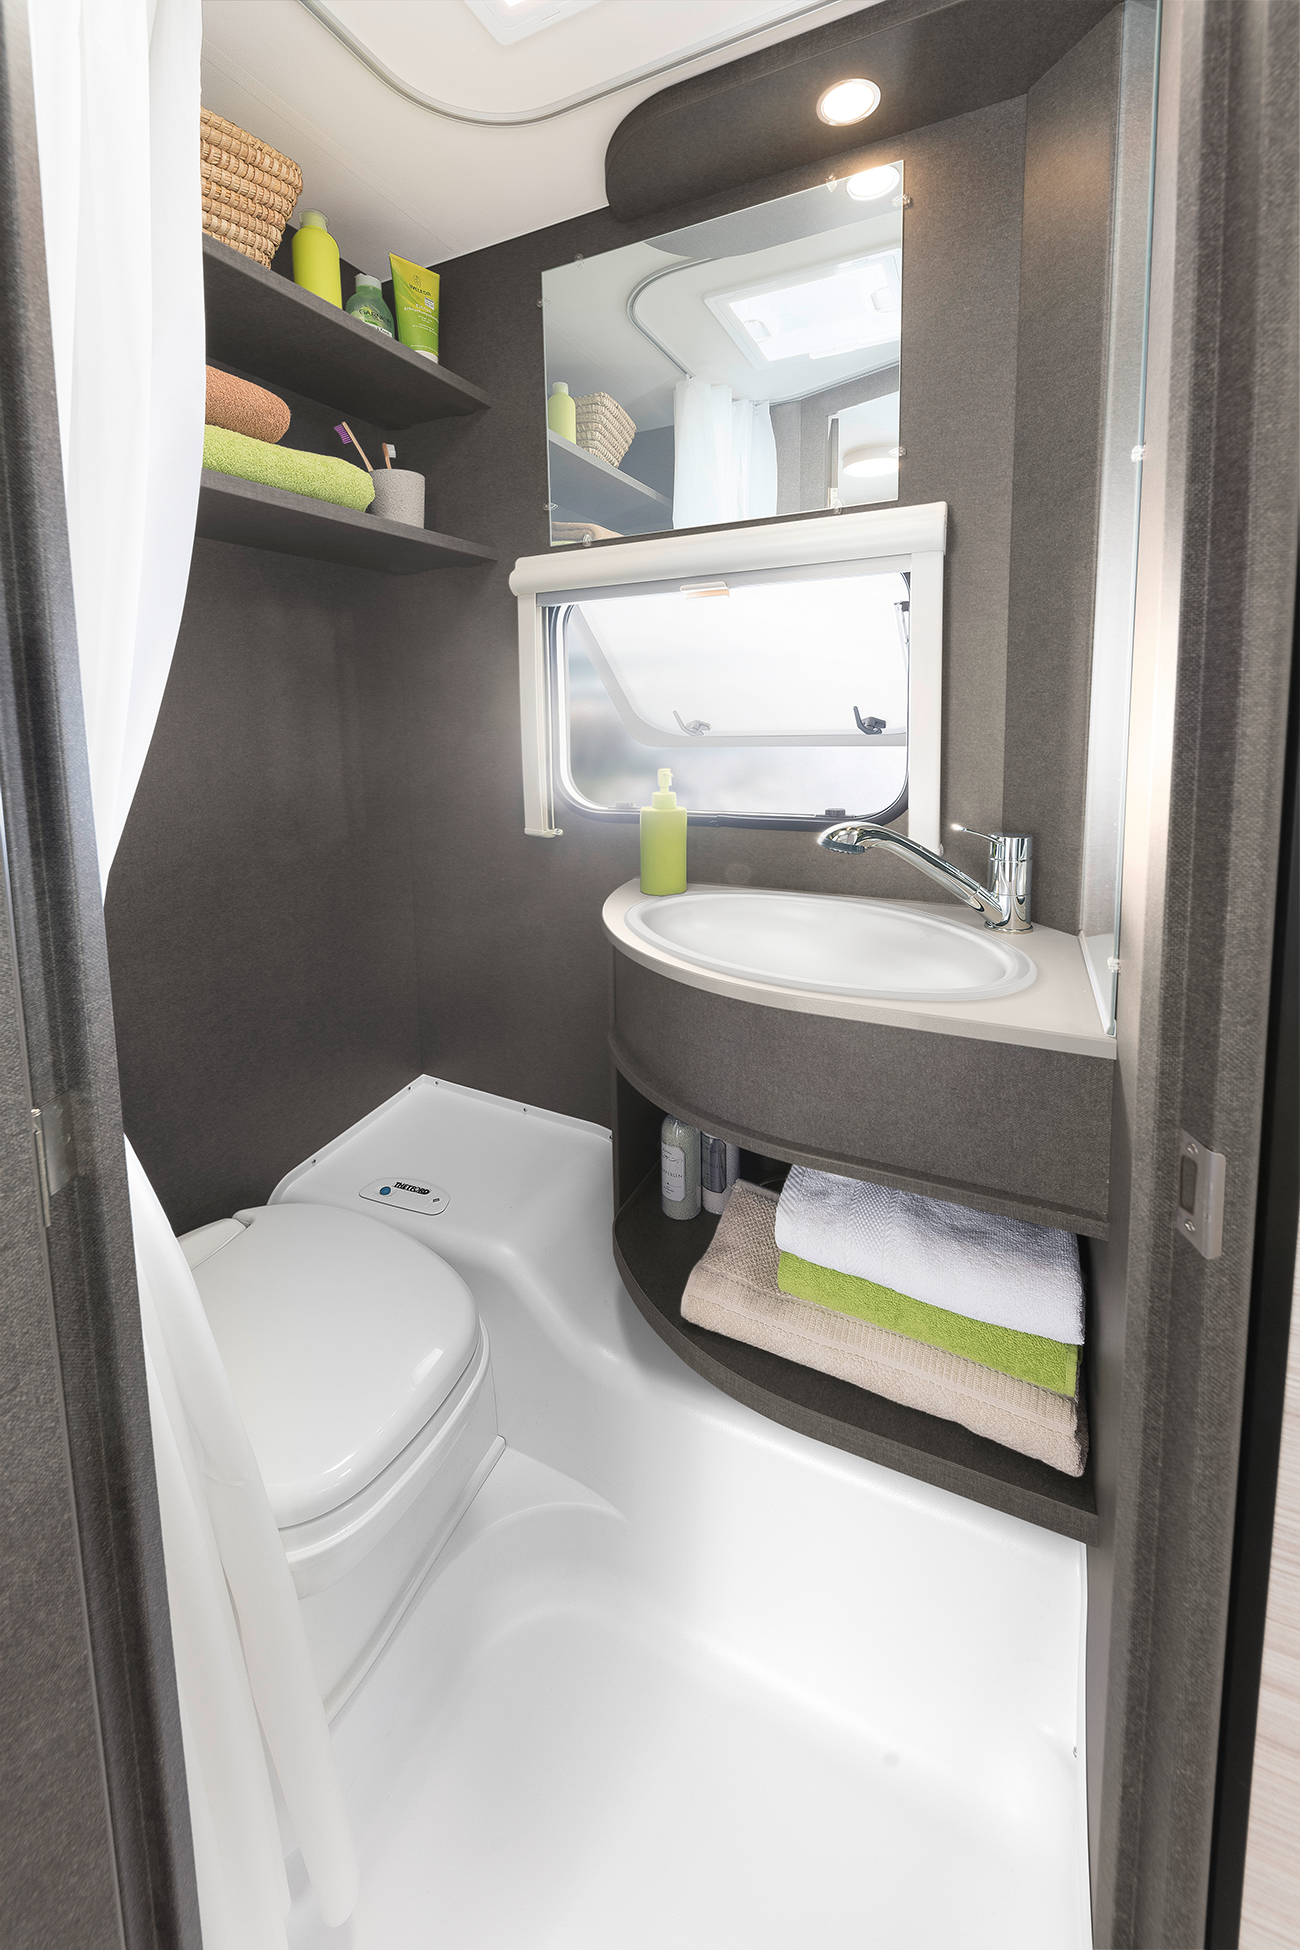 The c’joy is equipped with an attractive sink • 480 QLK | Timor